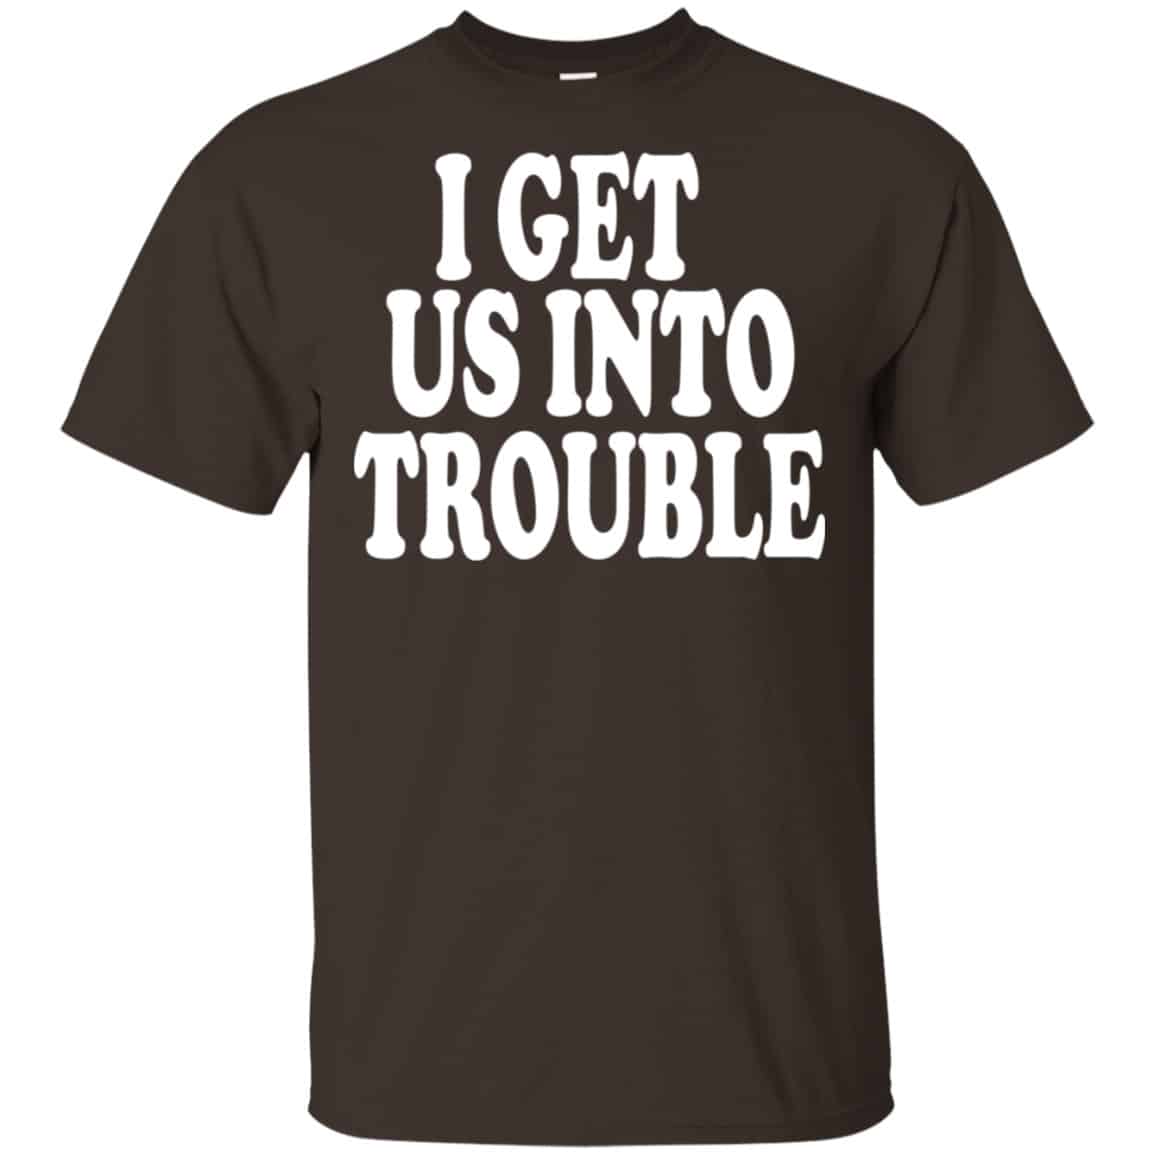 I Get Us Into Trouble Shirt, Hoodie, Tank | 0sTees